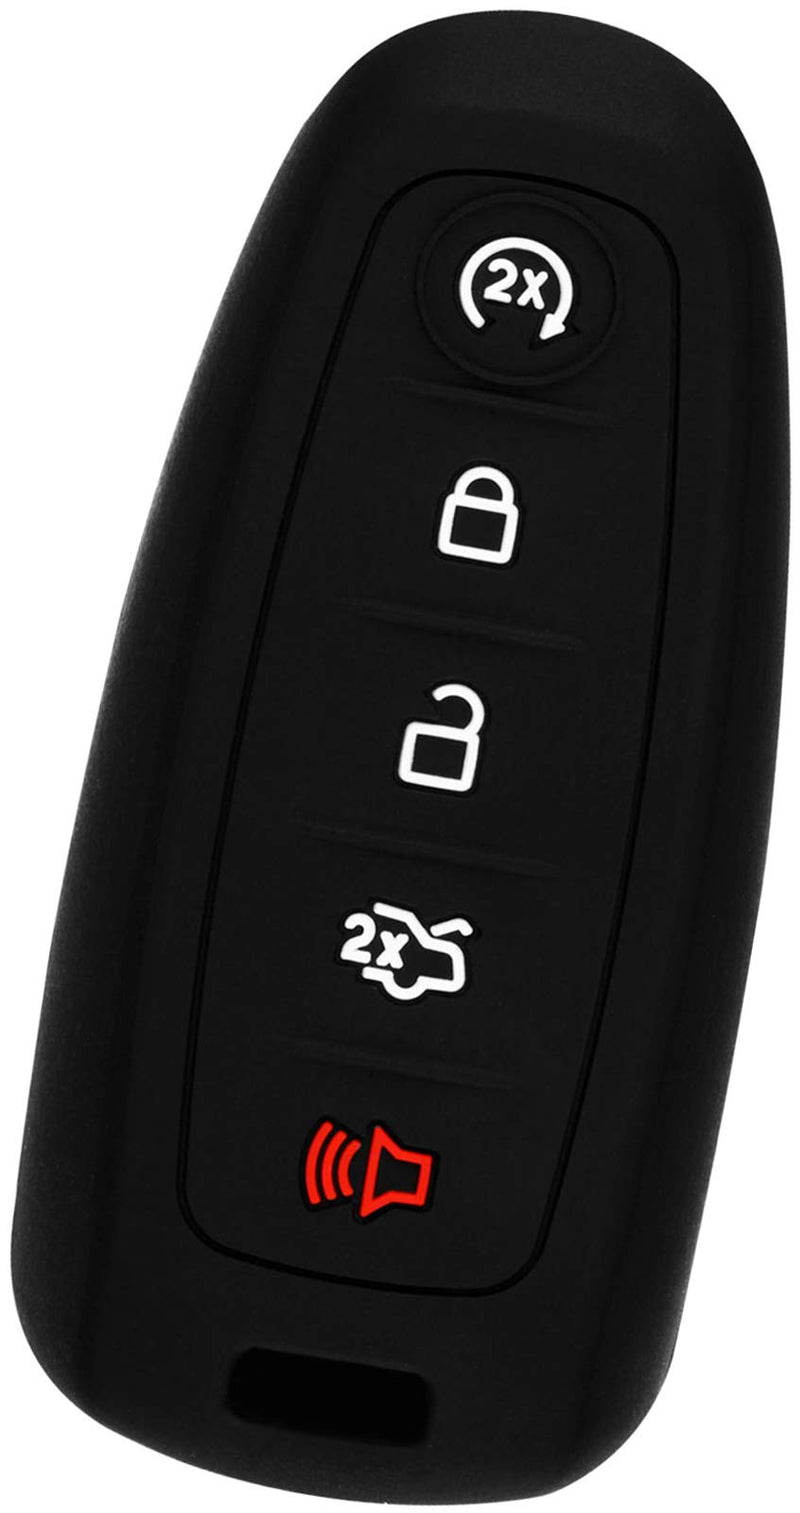  [AUSTRALIA] - KeyGuardz Keyless Entry Remote Car Smart Key Fob Outer Shell Cover Soft Rubber Case for Ford Lincoln Black